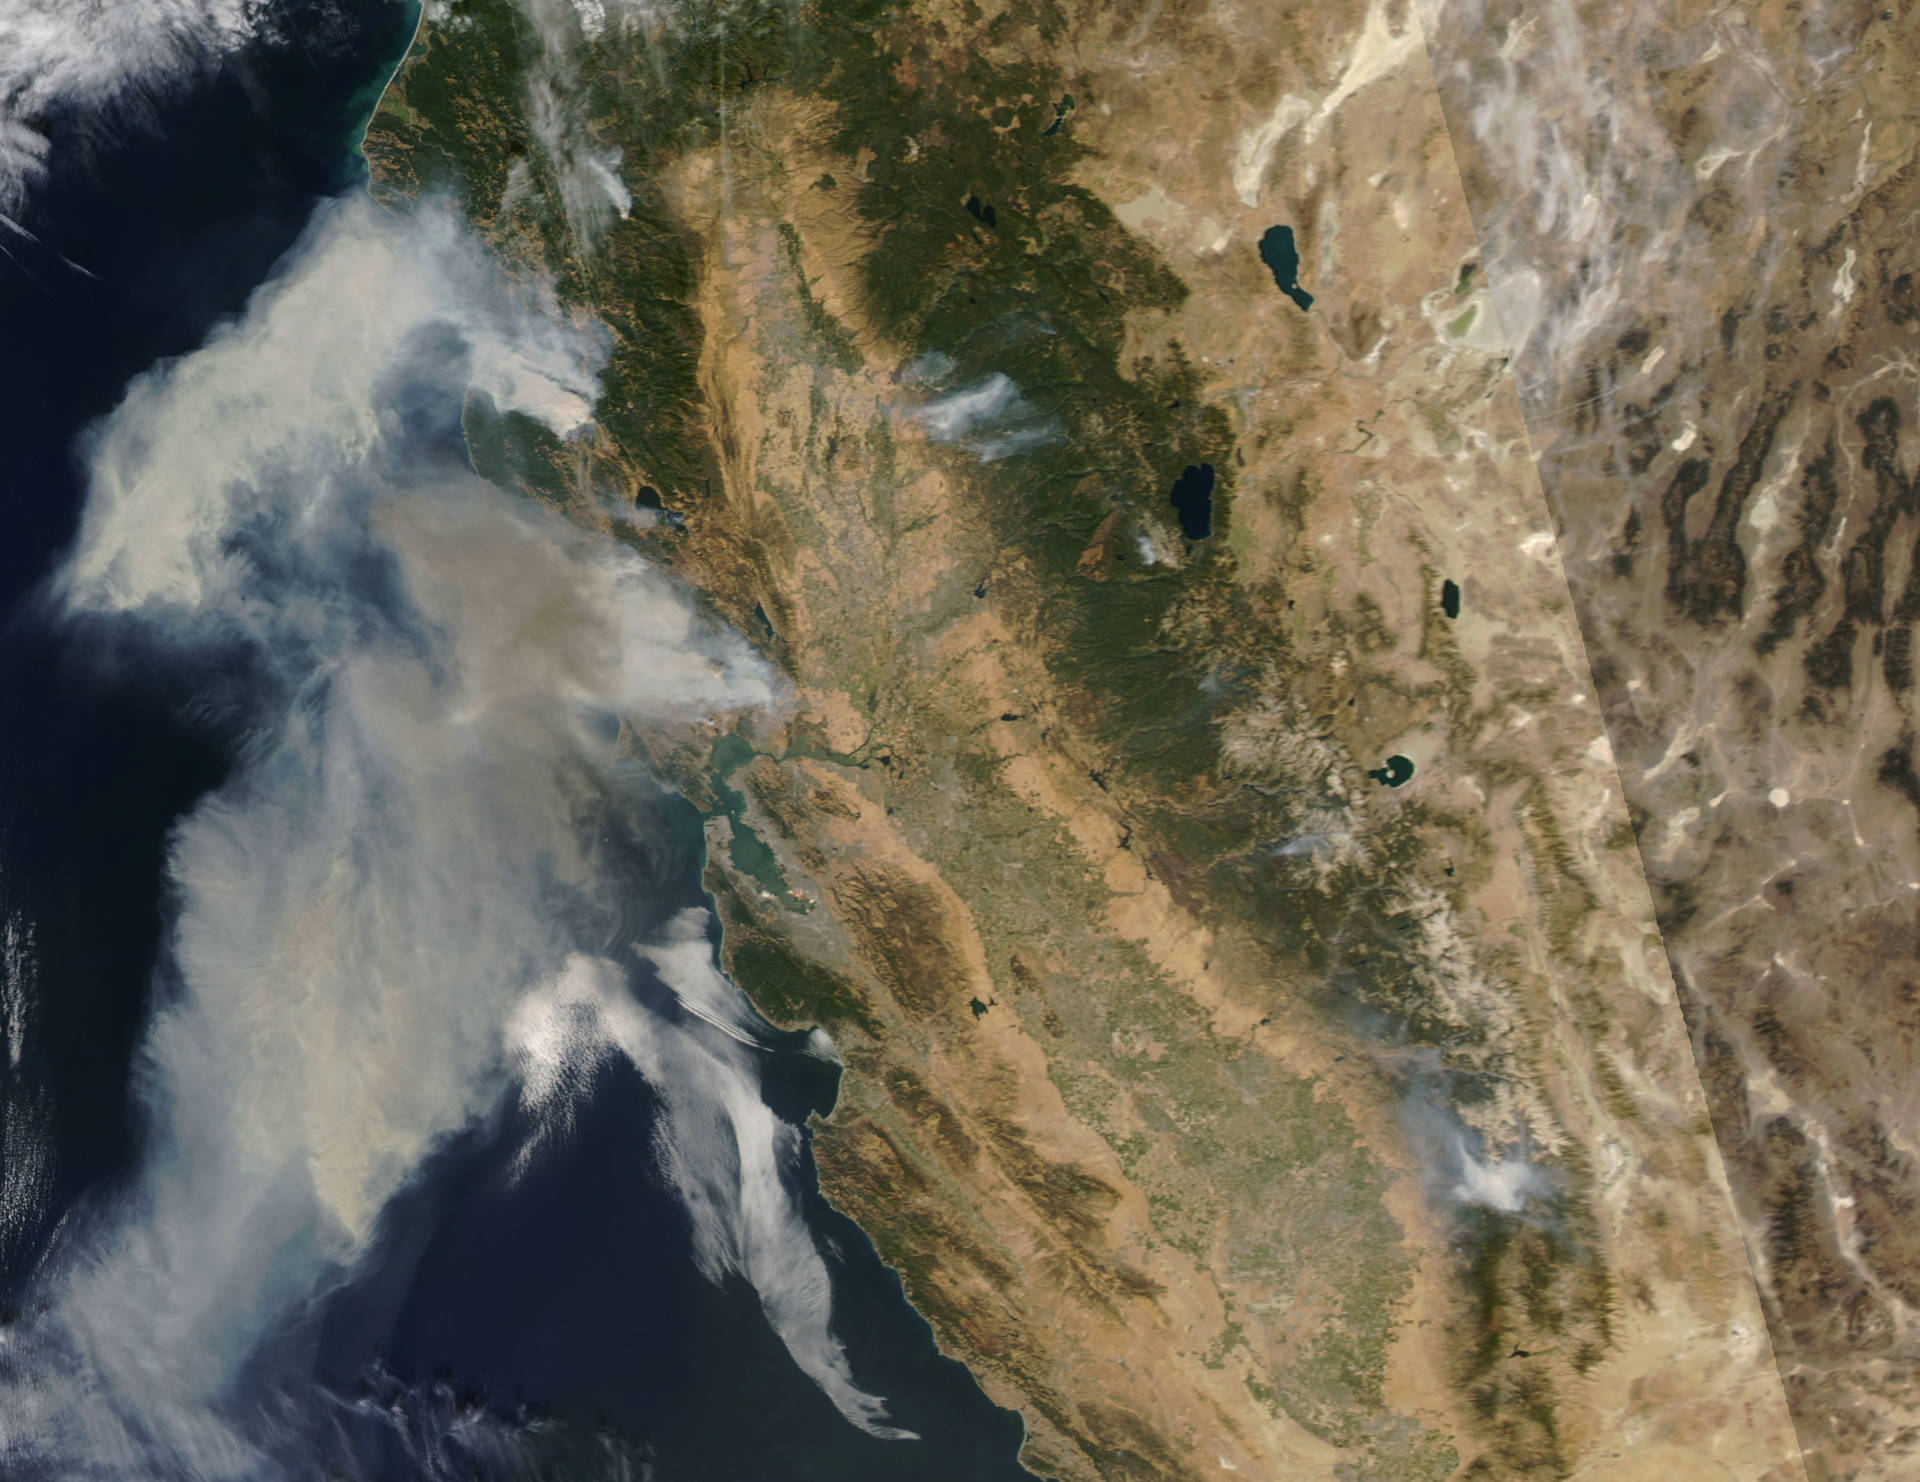 Diablo winds are driven by atmospheric high-pressure systems over the Great Basin. Here, the smoke from the October 2017 North Bay fires as captured by a NASA satellite. 